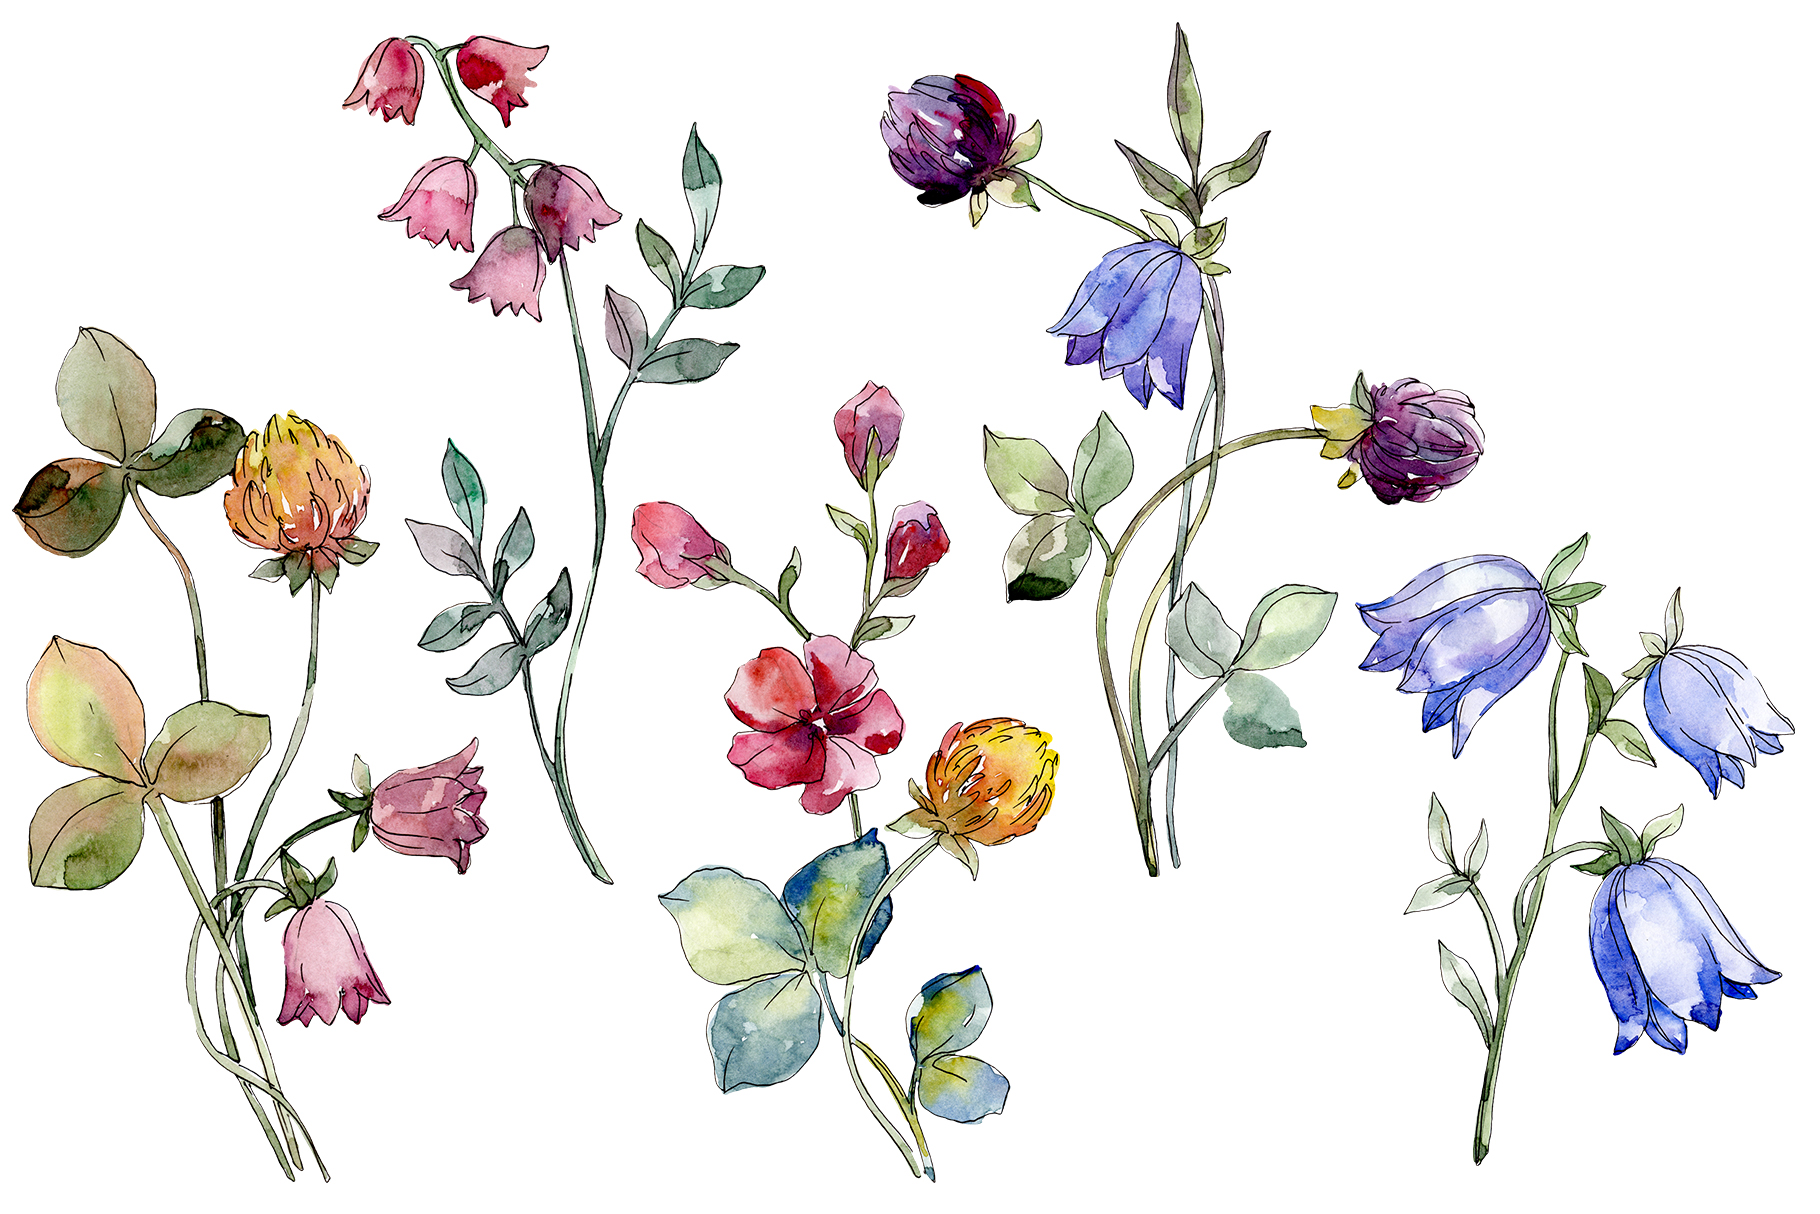 Wildflowers Watercolor png example image 1.